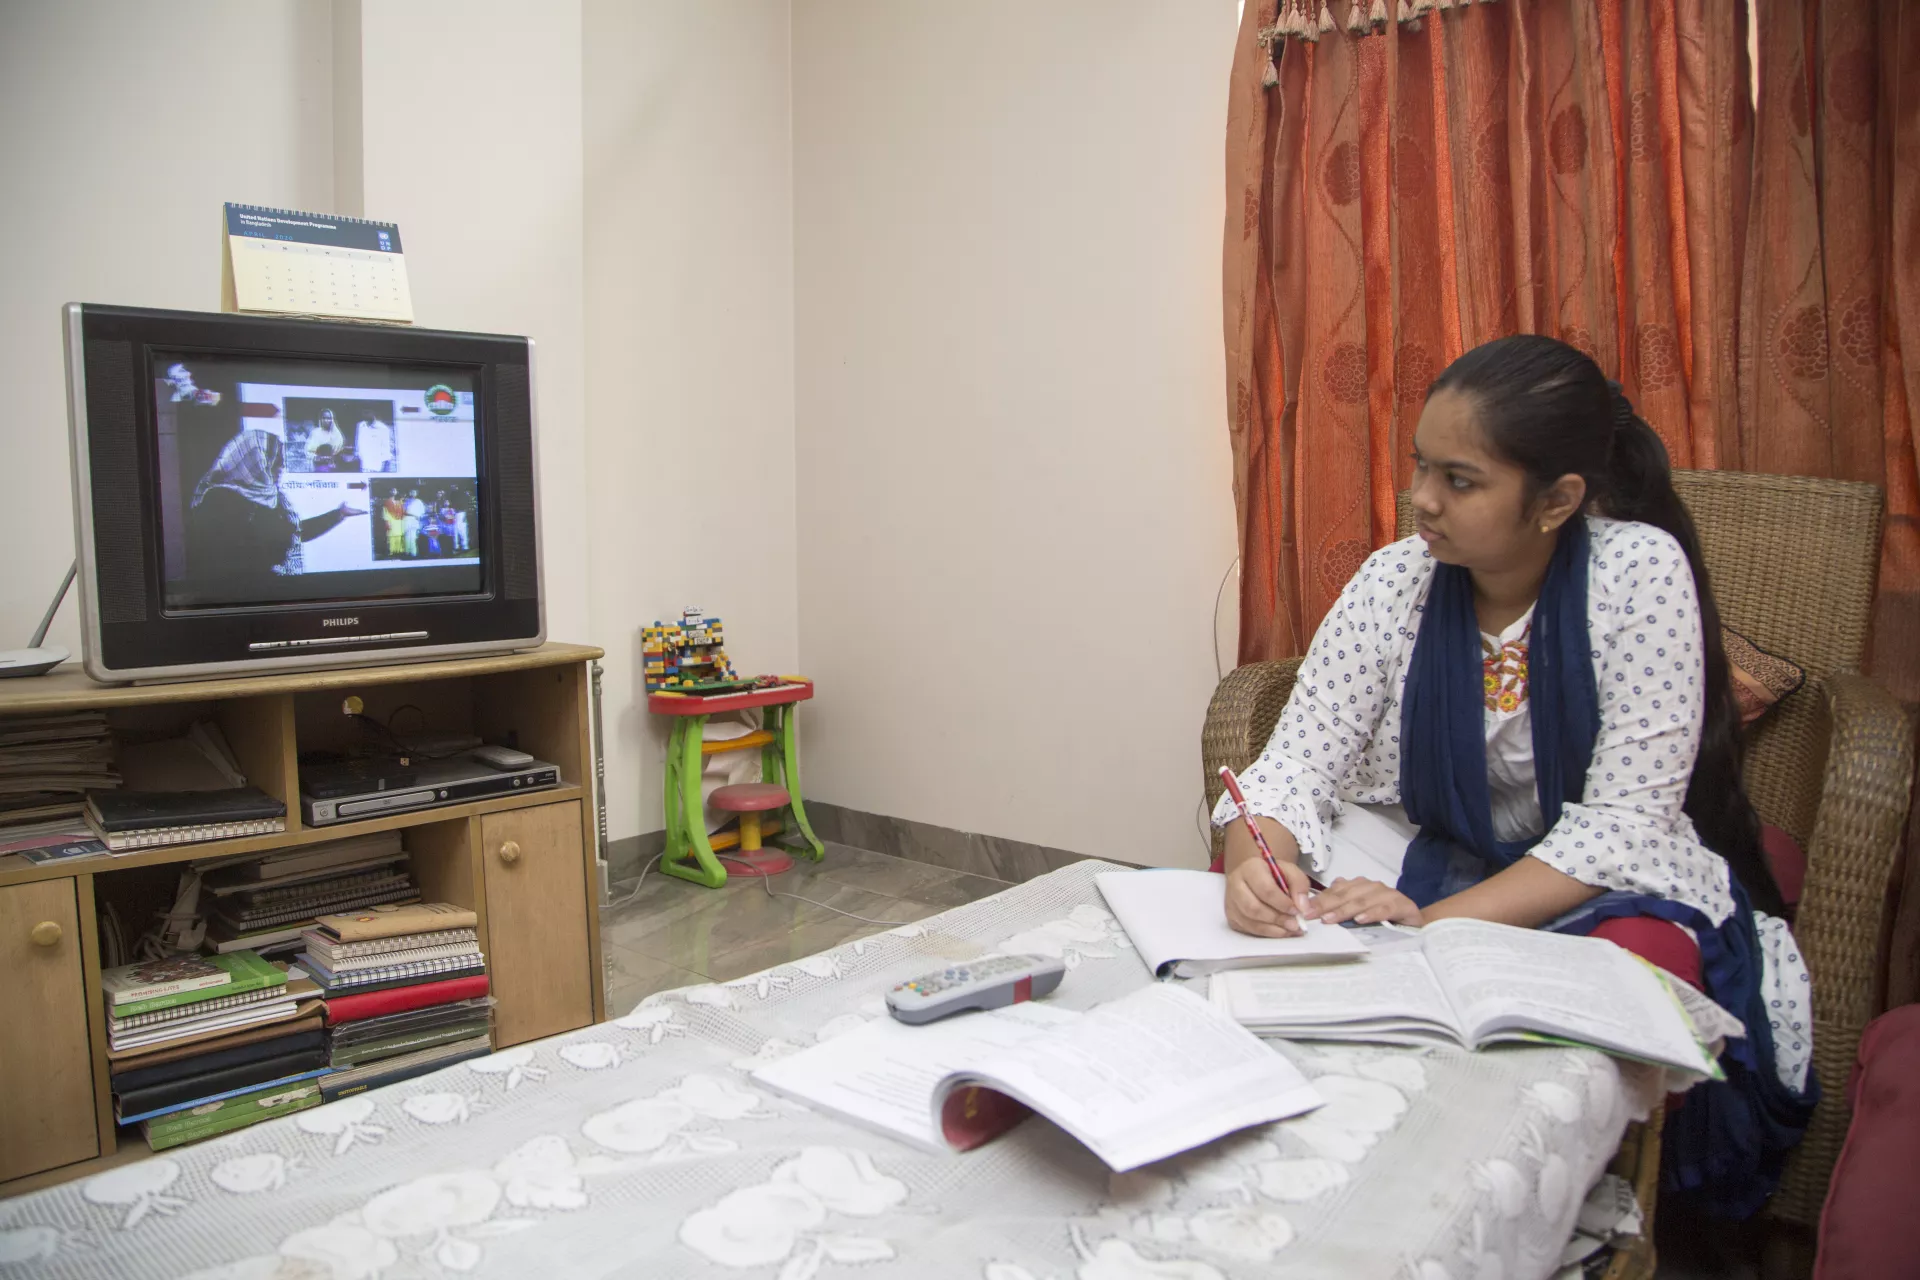 A young Bangladeshi girl is seen studying from home during the COVID-19 pandemic.